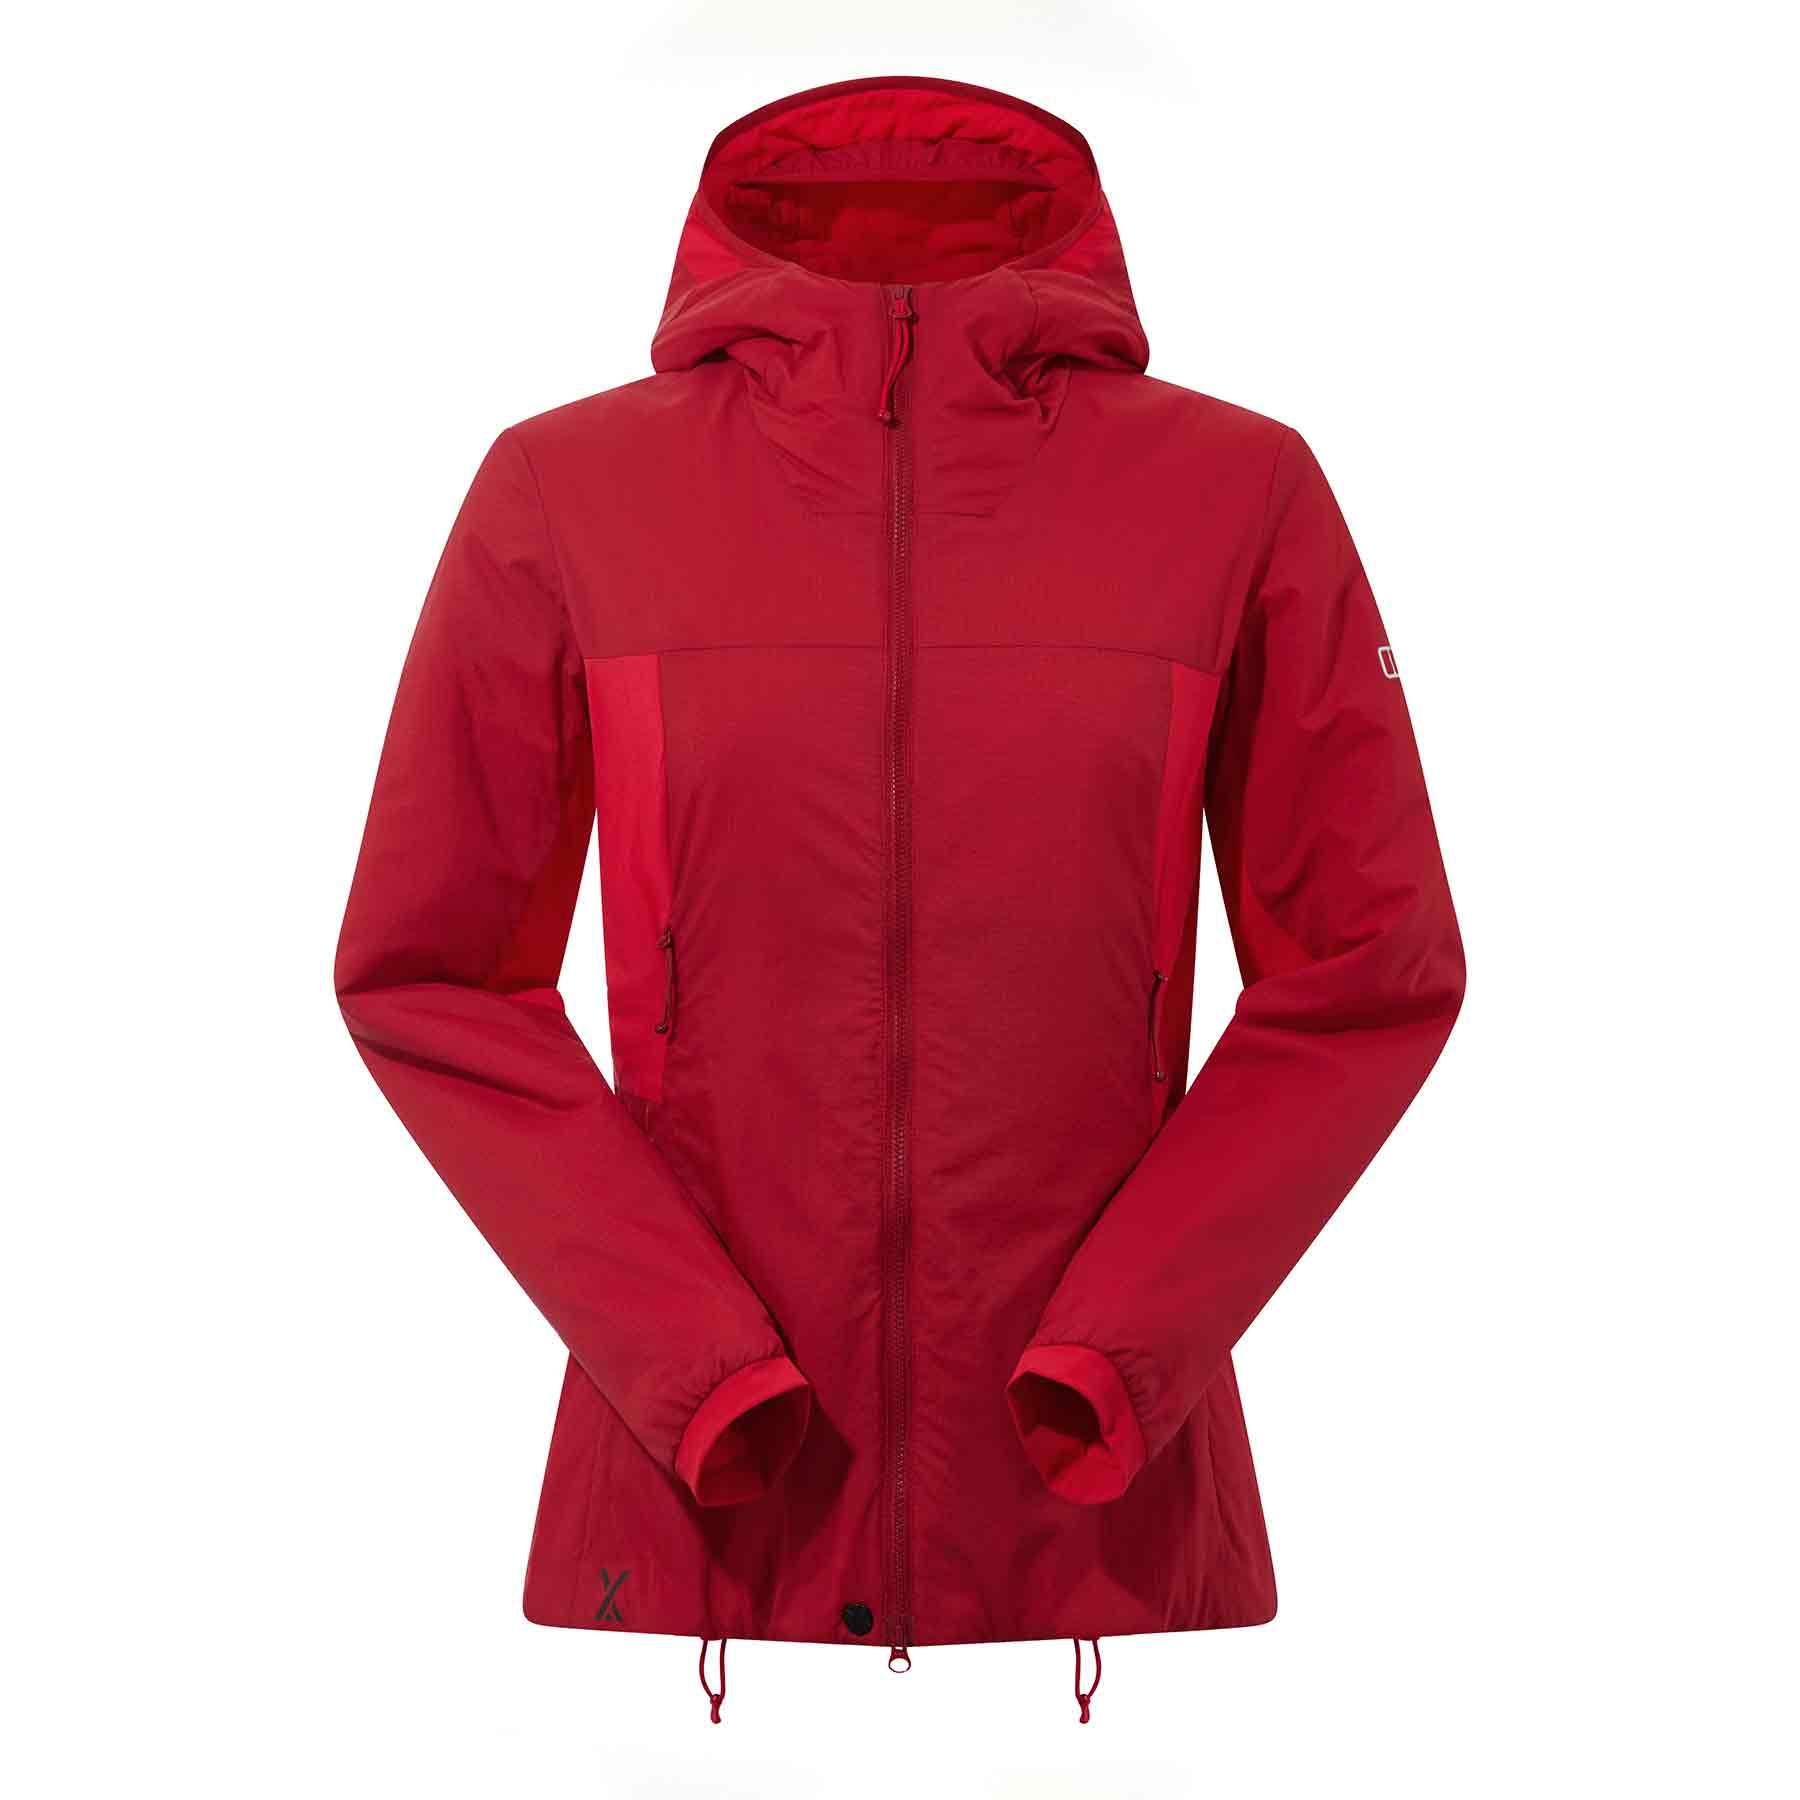 Berghaus Women’s Extrem Seeker Synthetic Hoody - The Luxury Promotional Gifts Company Limited